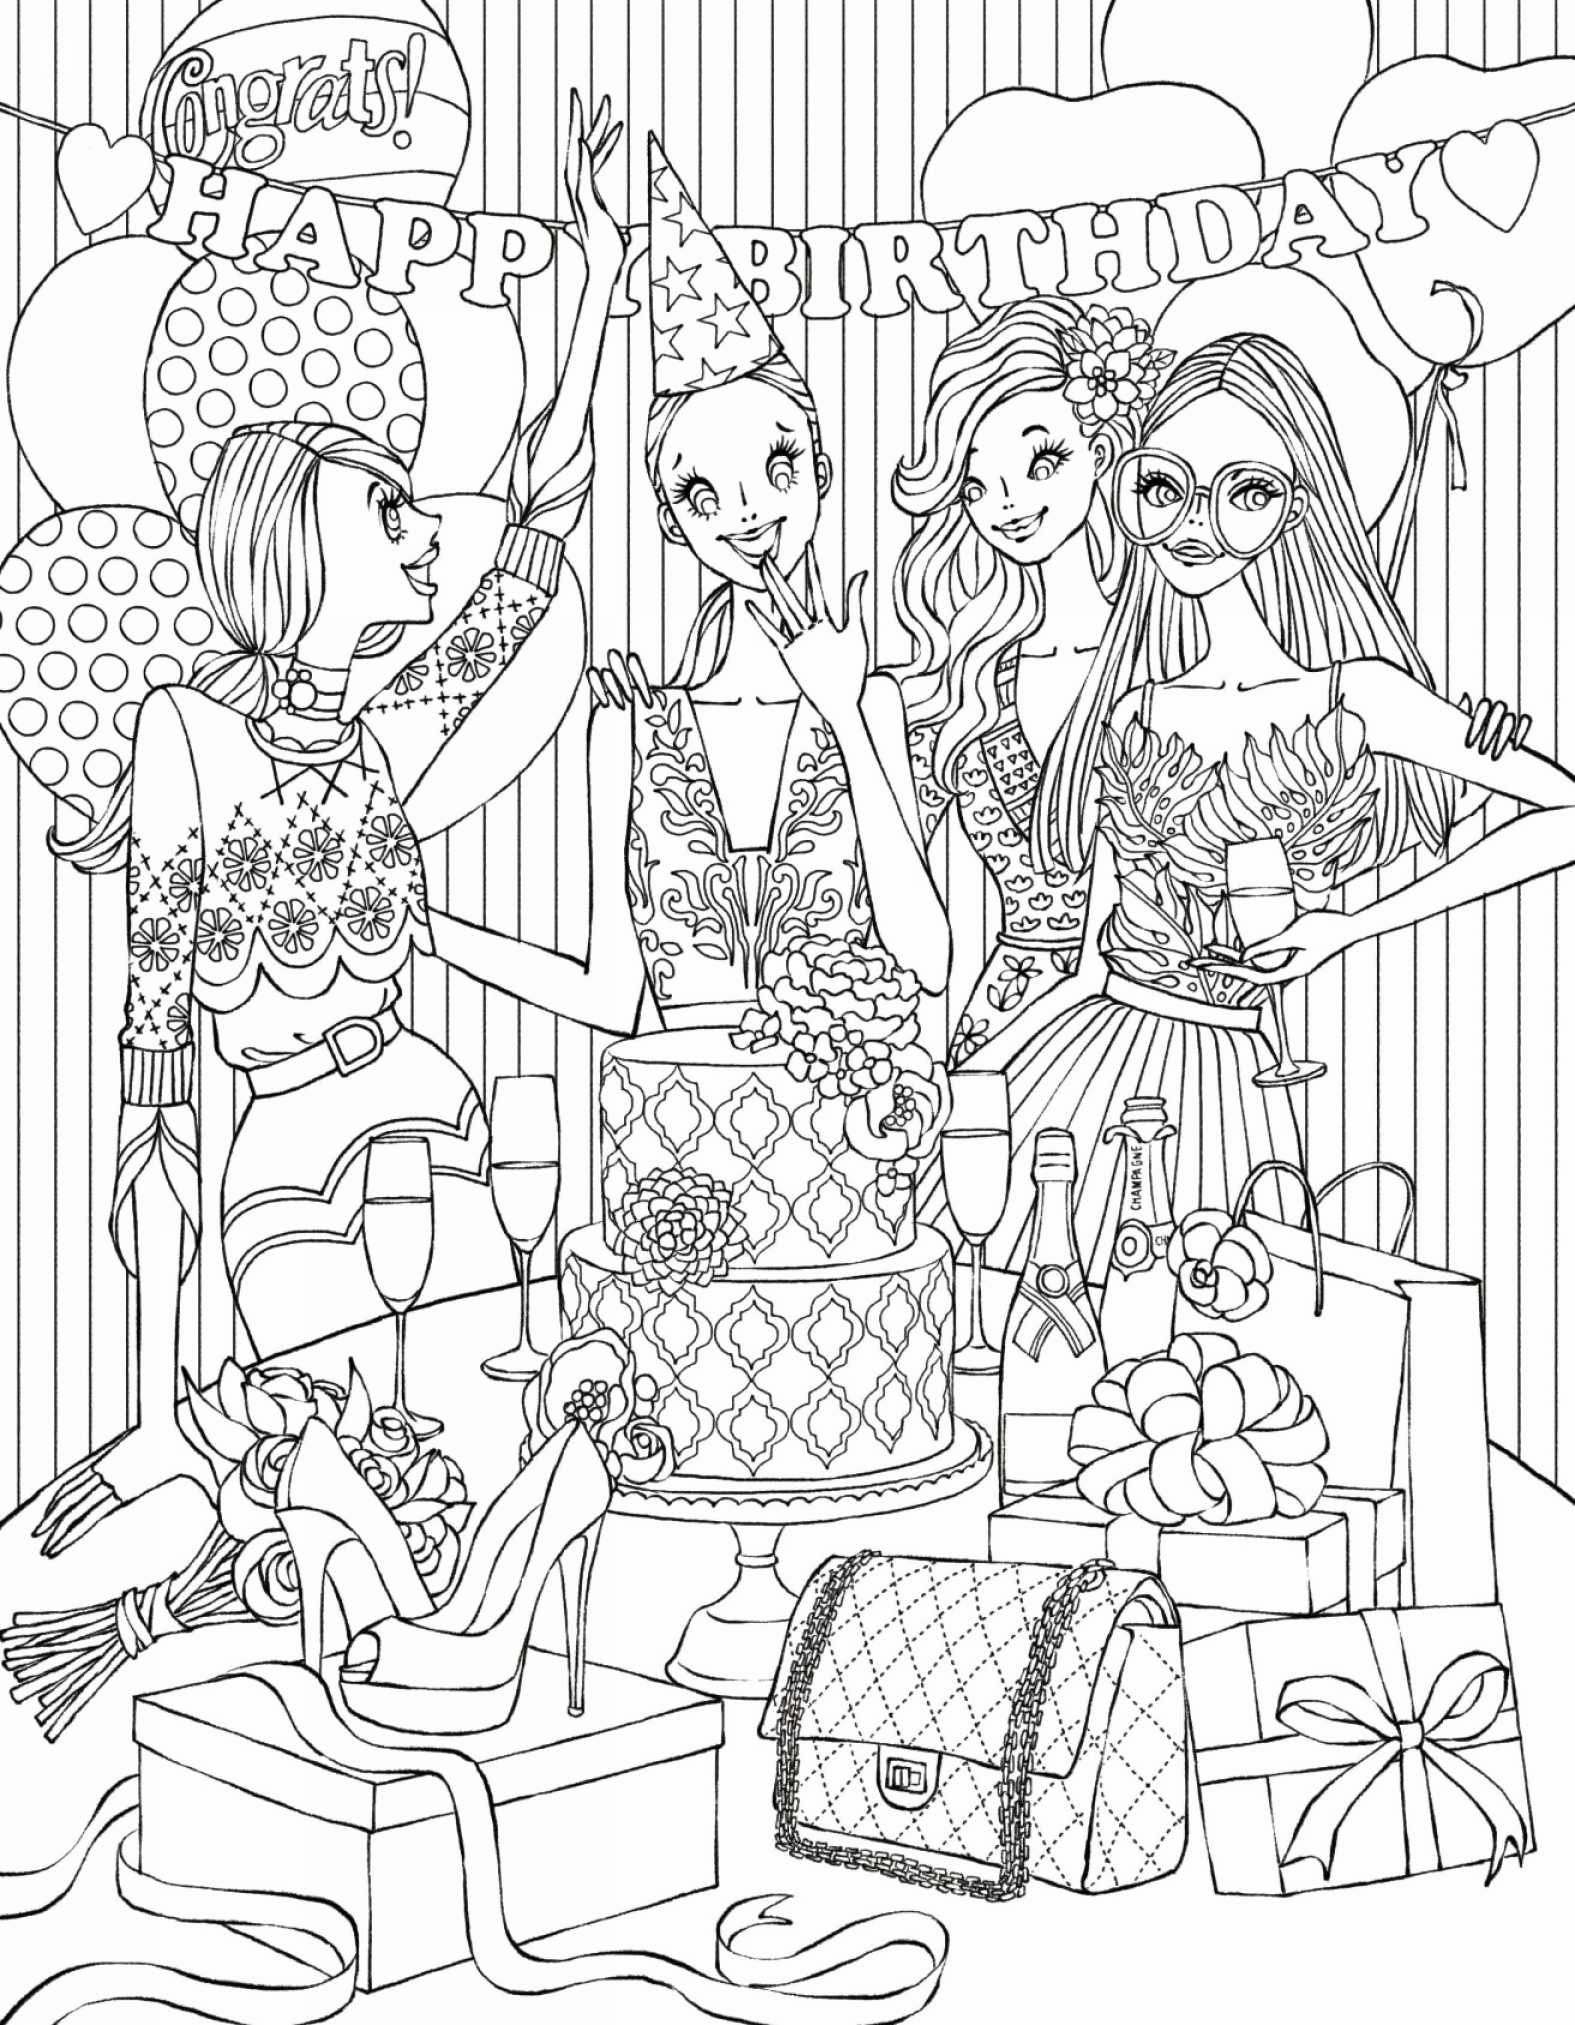 Coloring Pages Of Diamonds 20 Diamond Coloring Pages Gallery Coloring Sheets